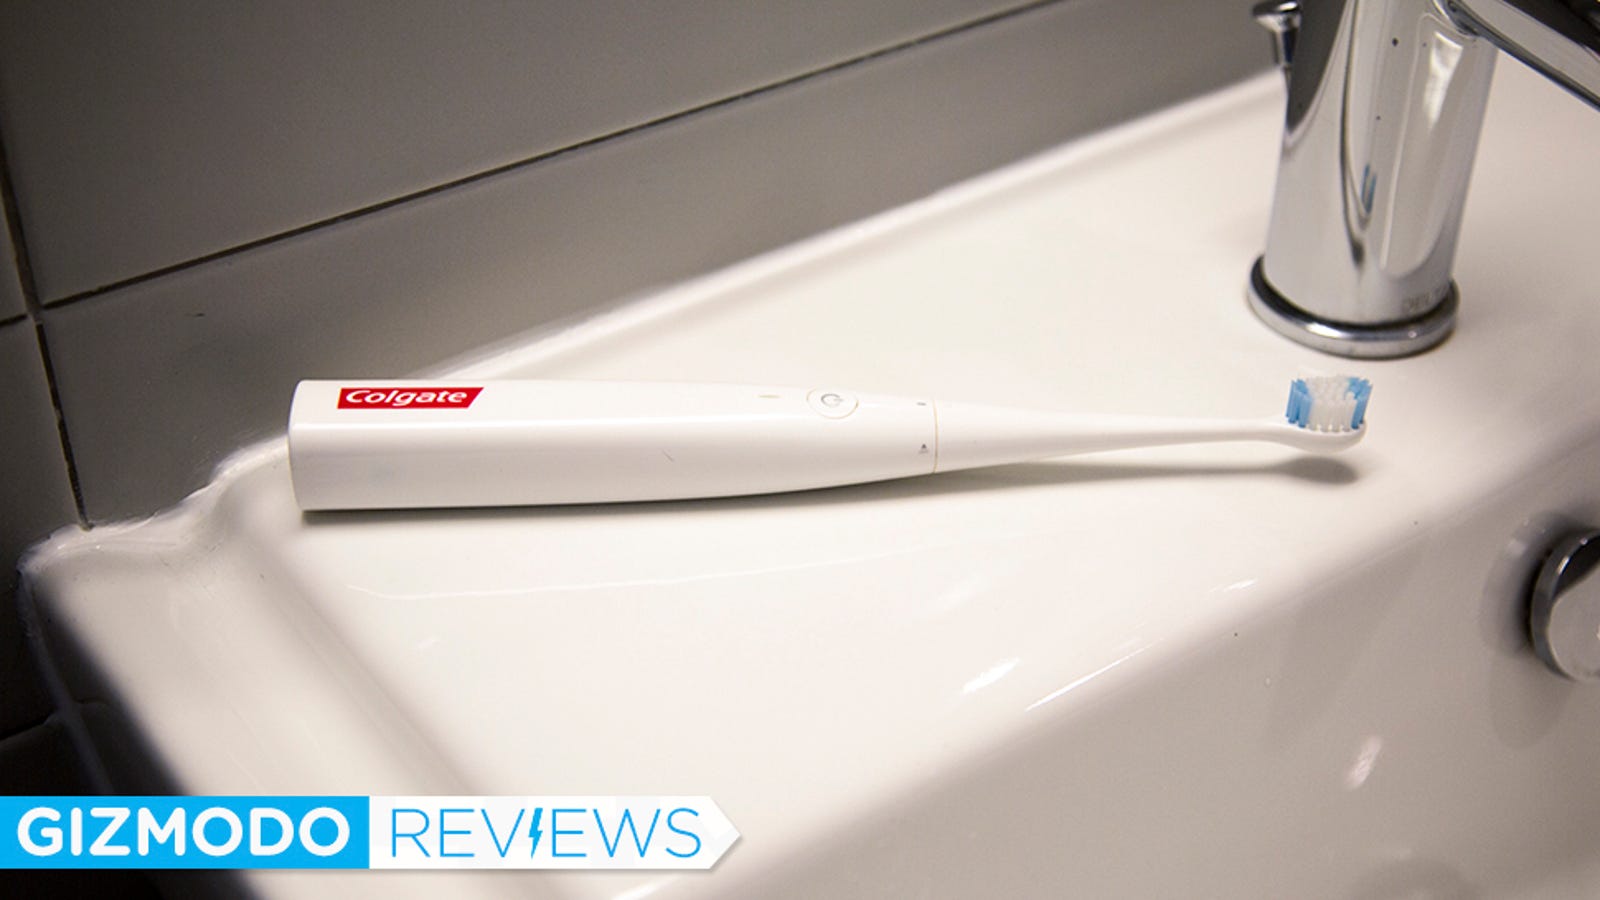 Colgate S Ai Toothbrush Makes Me Never Want To Brush My Teeth Again